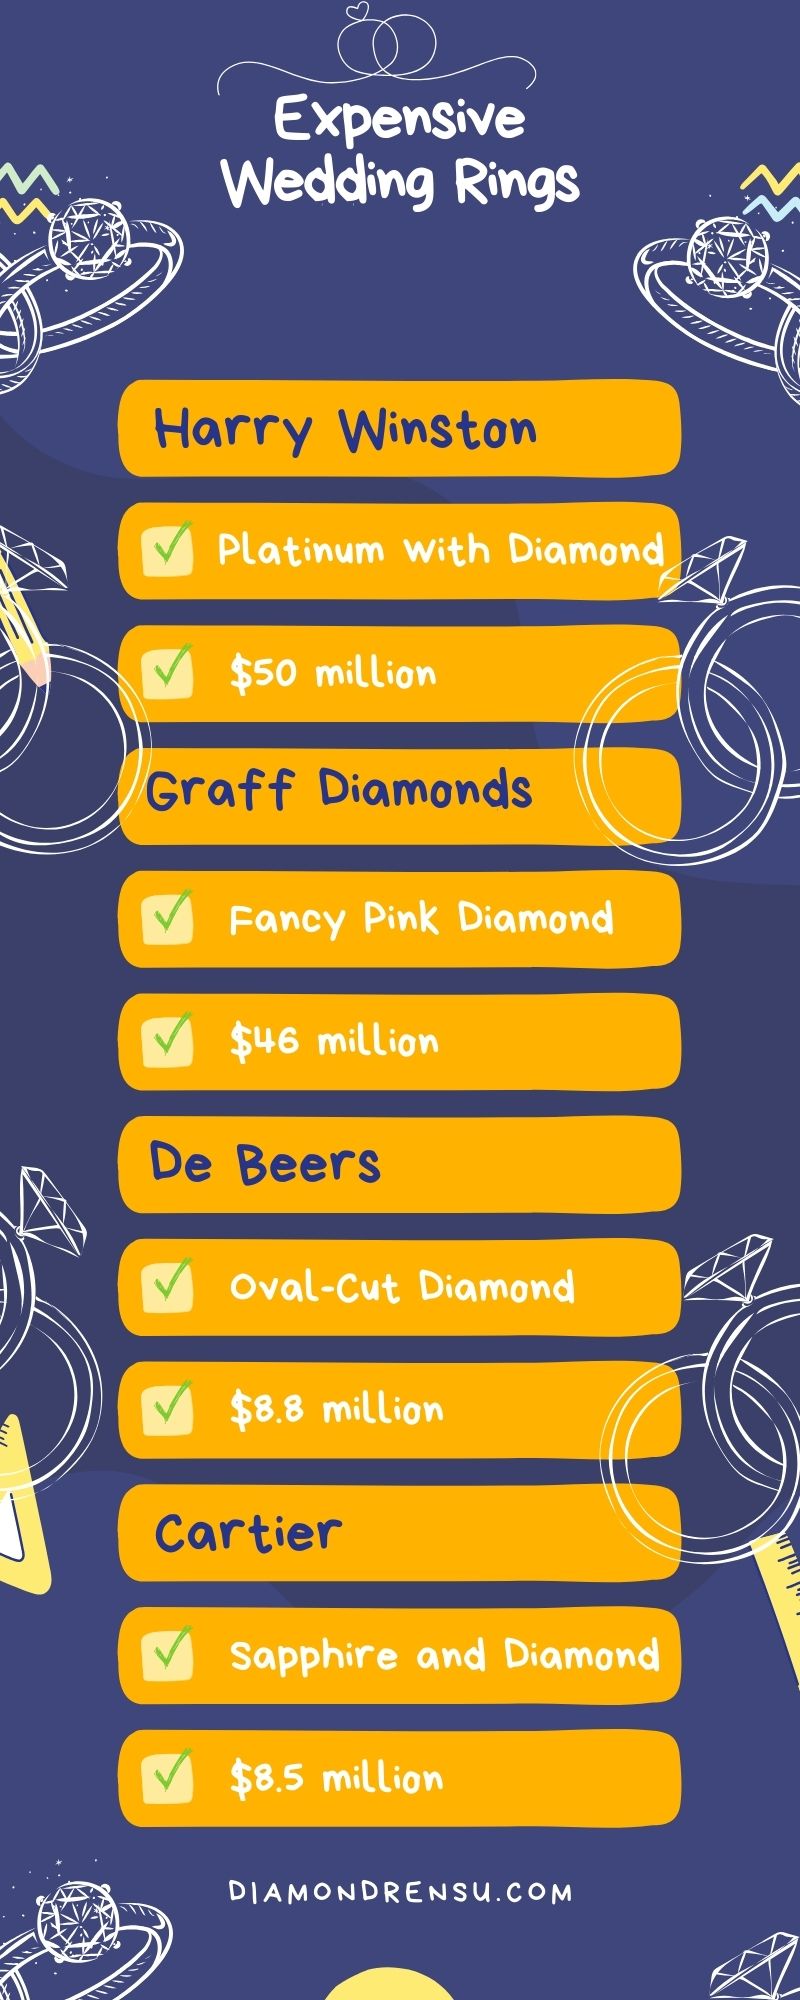 Expensive wedding rings infographic